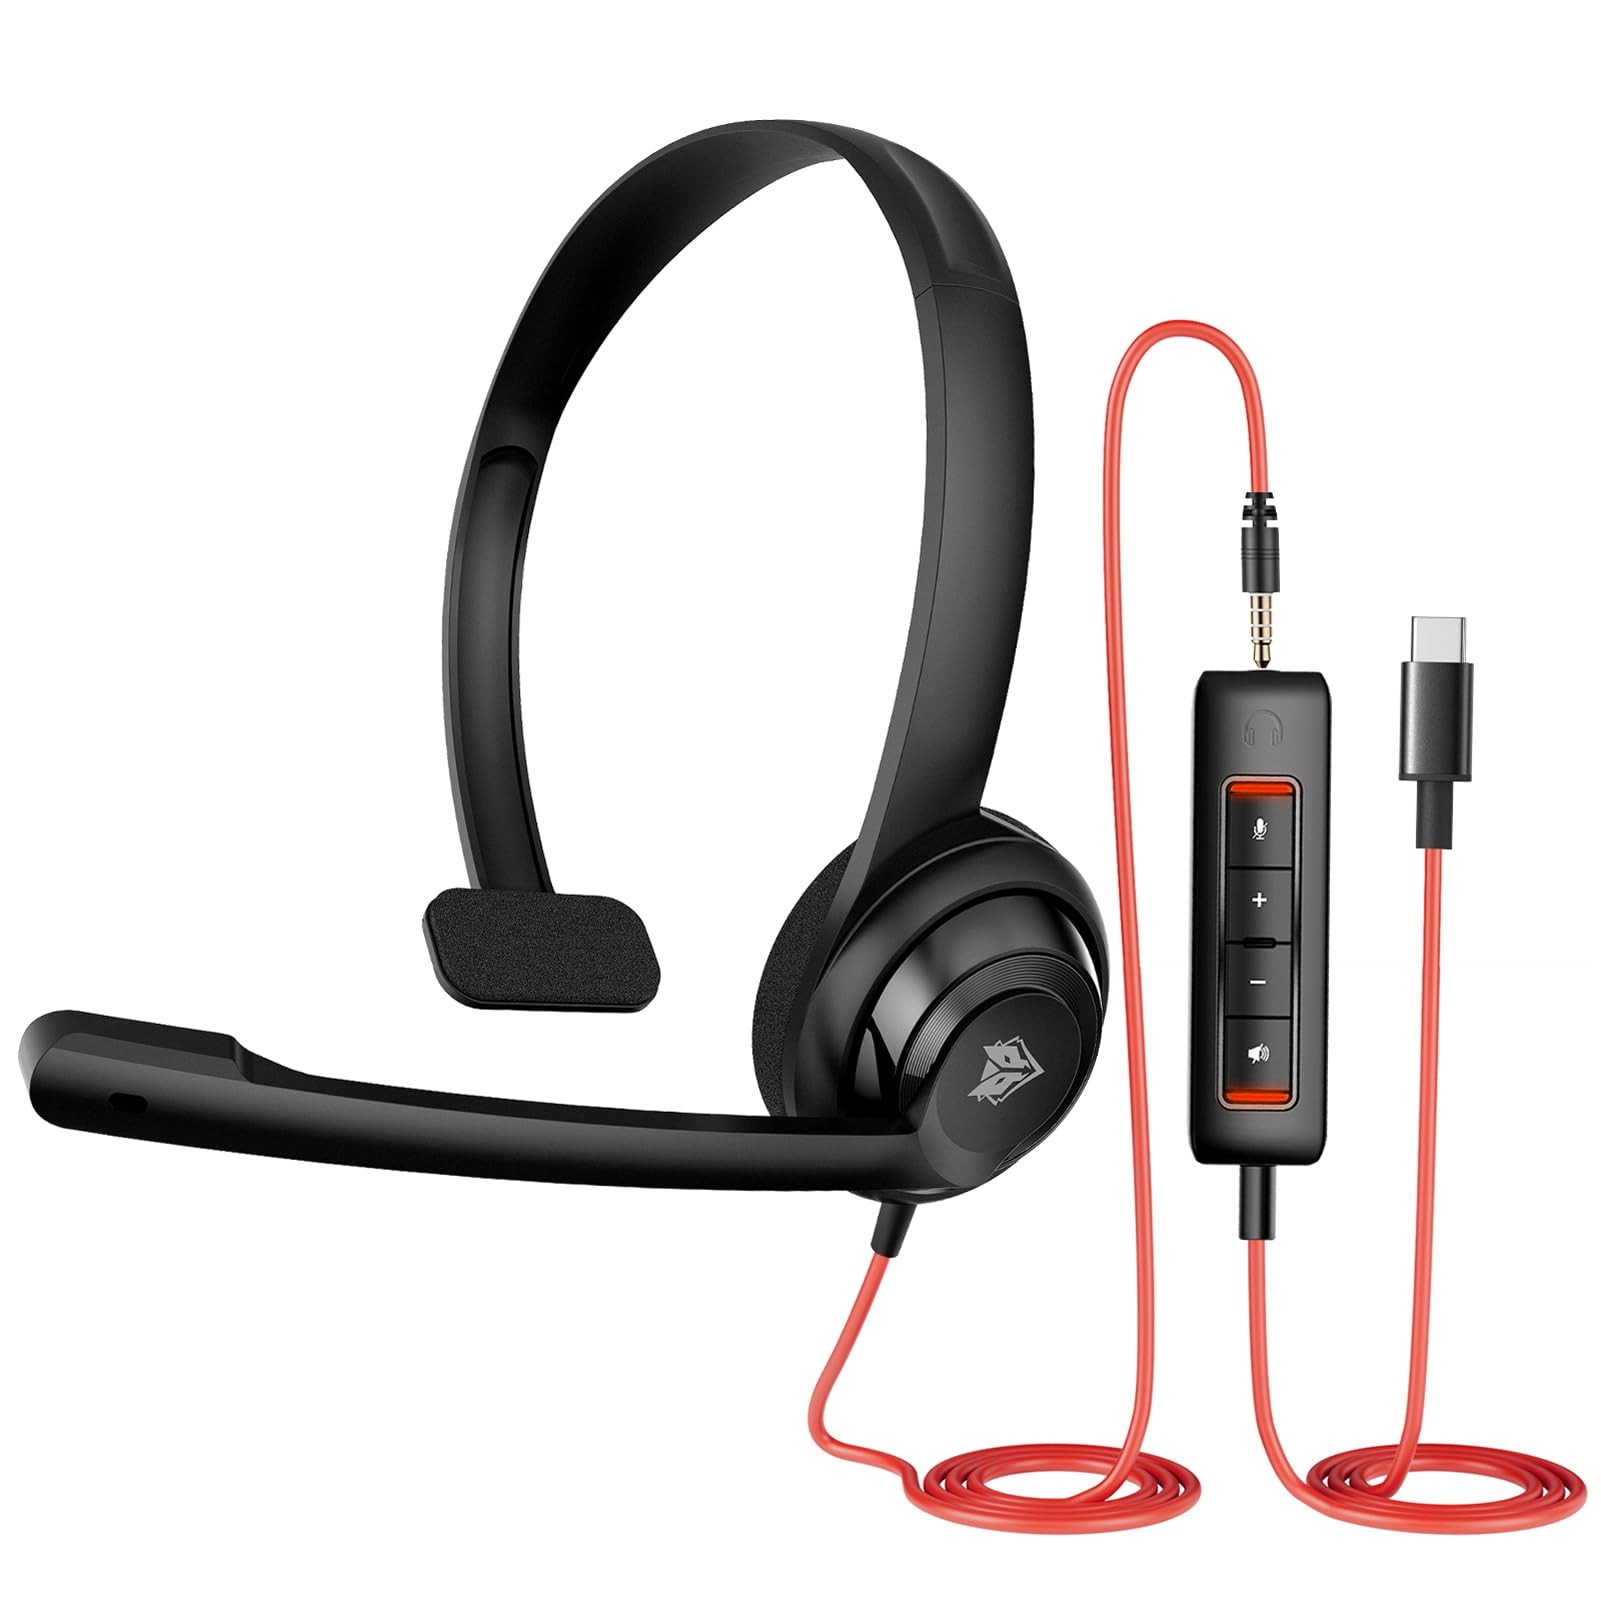 NUBWO HW02 USB C/3.5 Headset with Microphone,Computer Headset with in-line Mute & Volume Control,Wired Headset for Laptop,Skype,Zoom,Call Center,Meetings,Webinar,Home